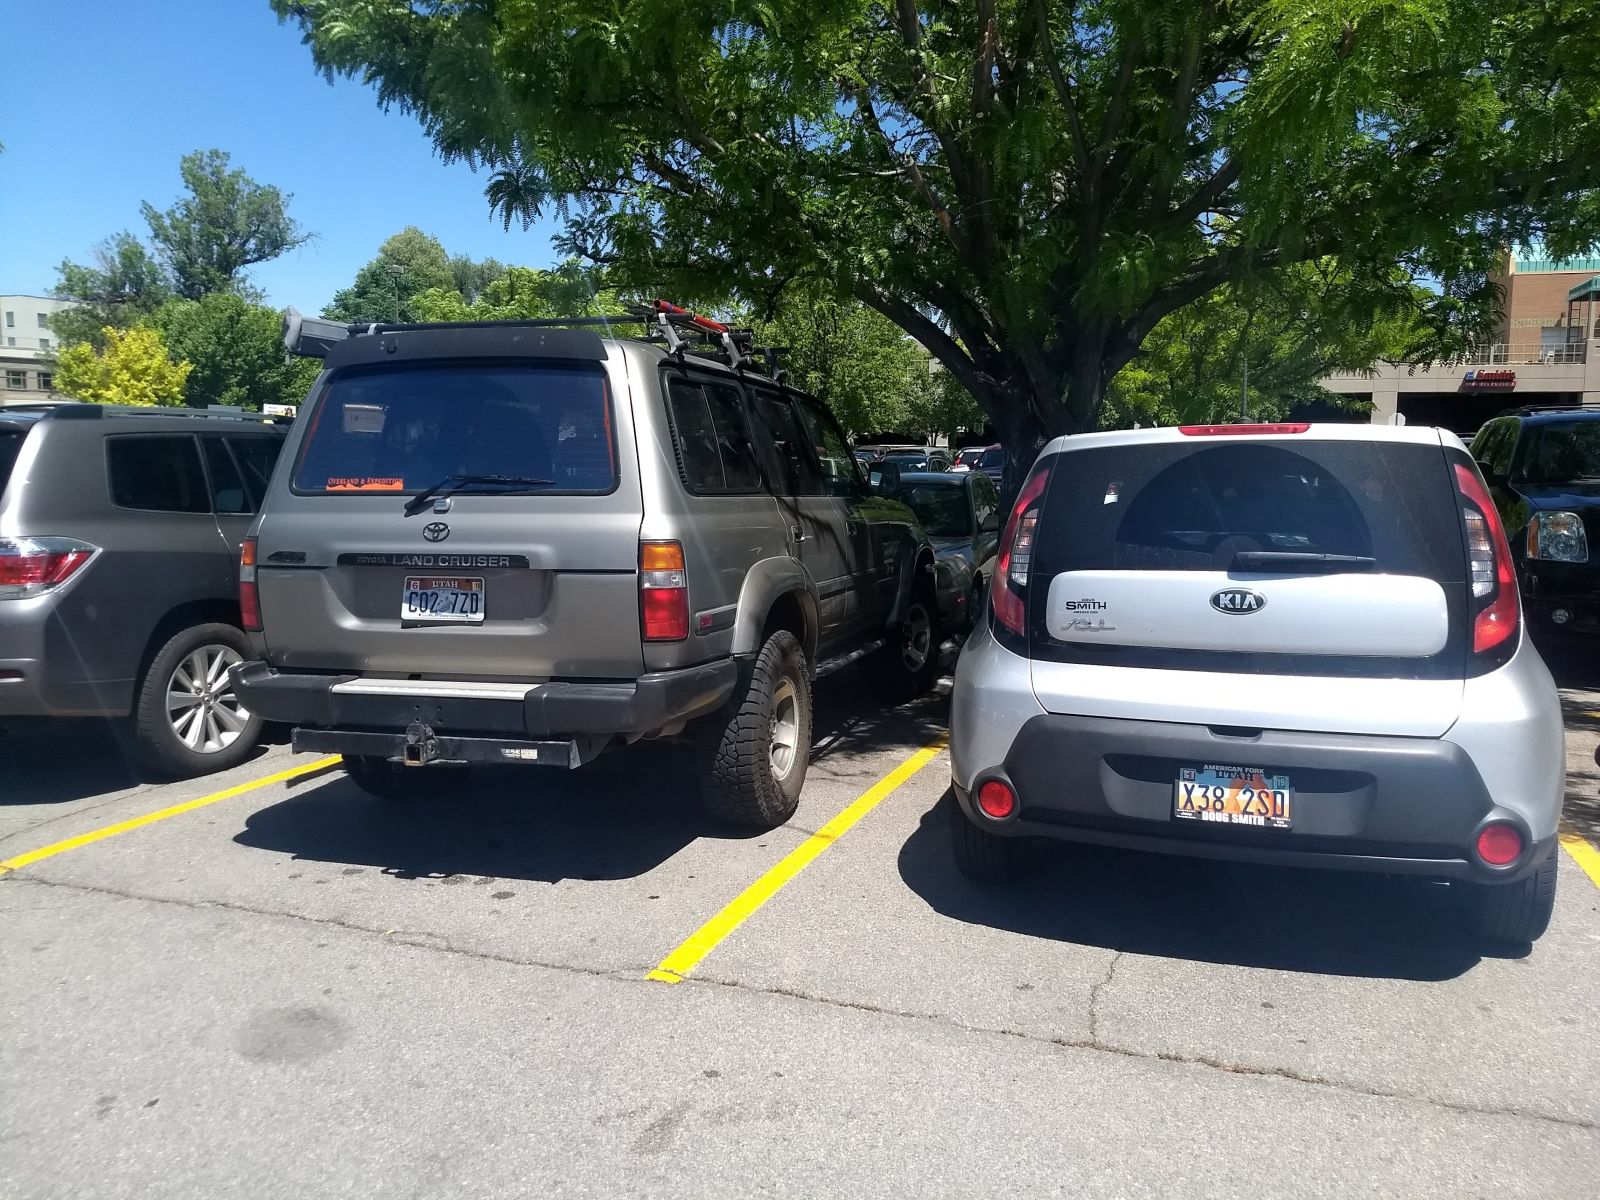 Just a couple of “SUV’s”, hanging out. Both vehicles are classified as light trucks, somehow.